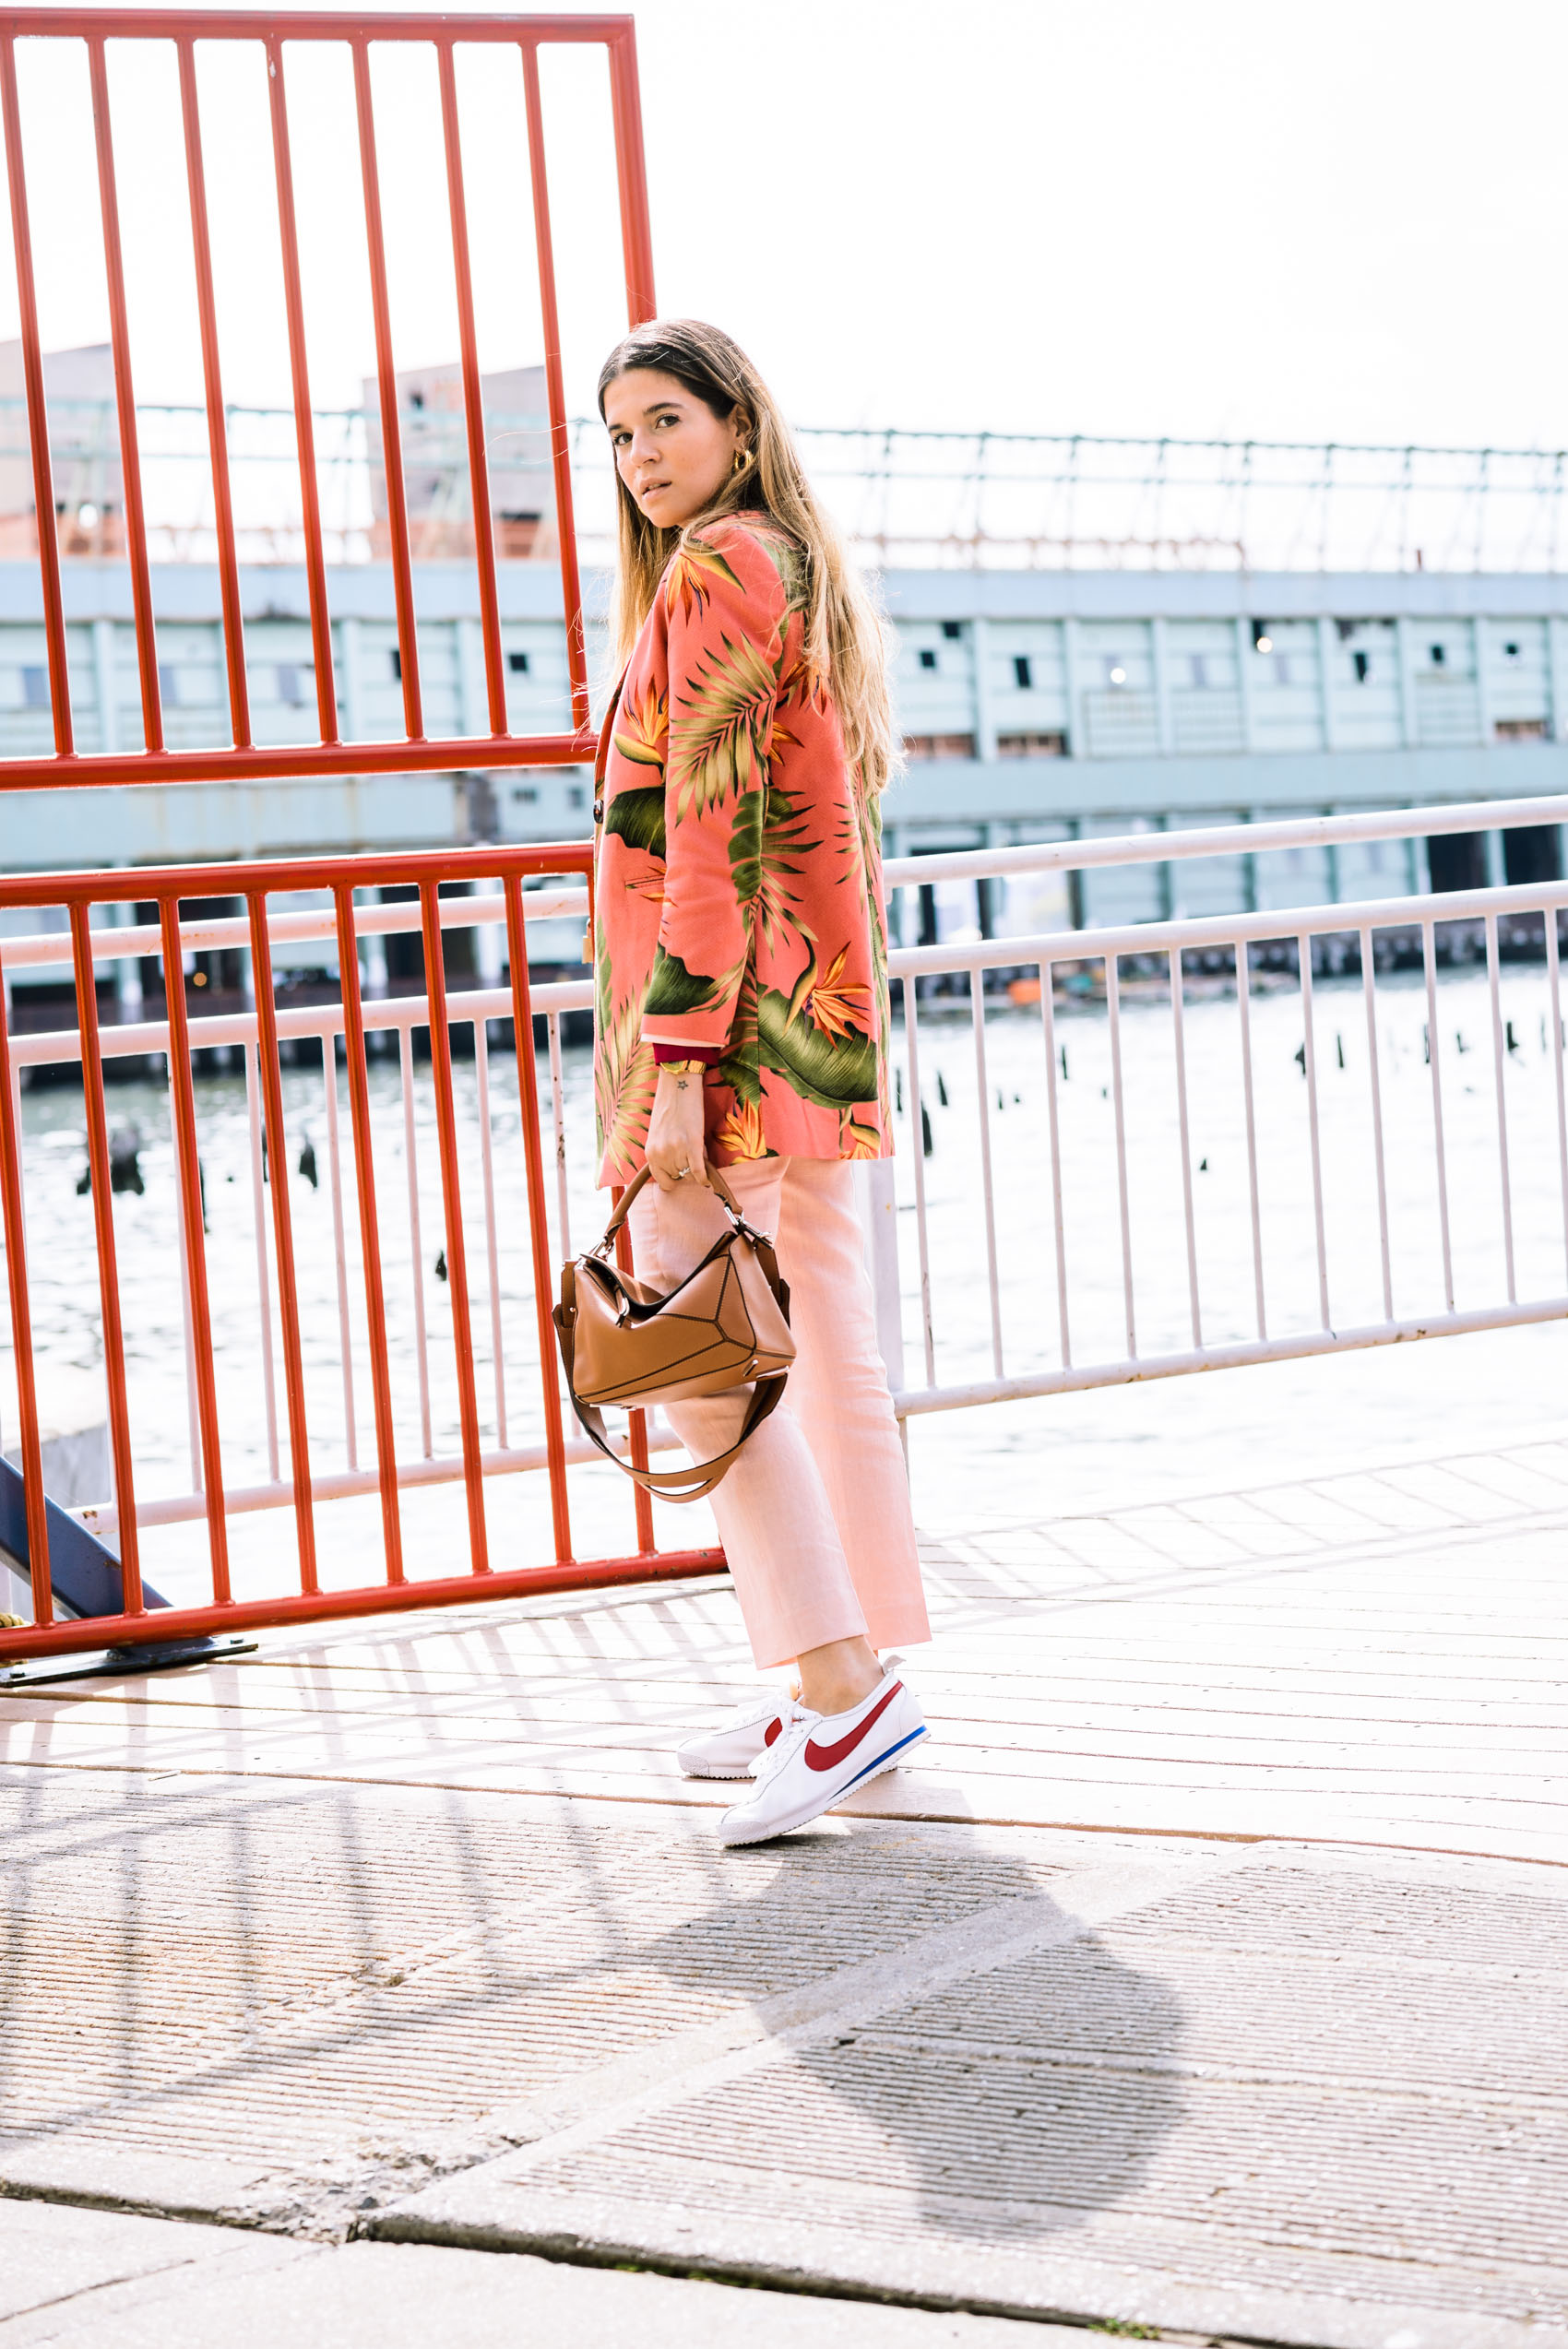 Maristella at NYFW wearing a pink pantsuit by Colombian label Atelier Crump with a tropical Heliconia print coat